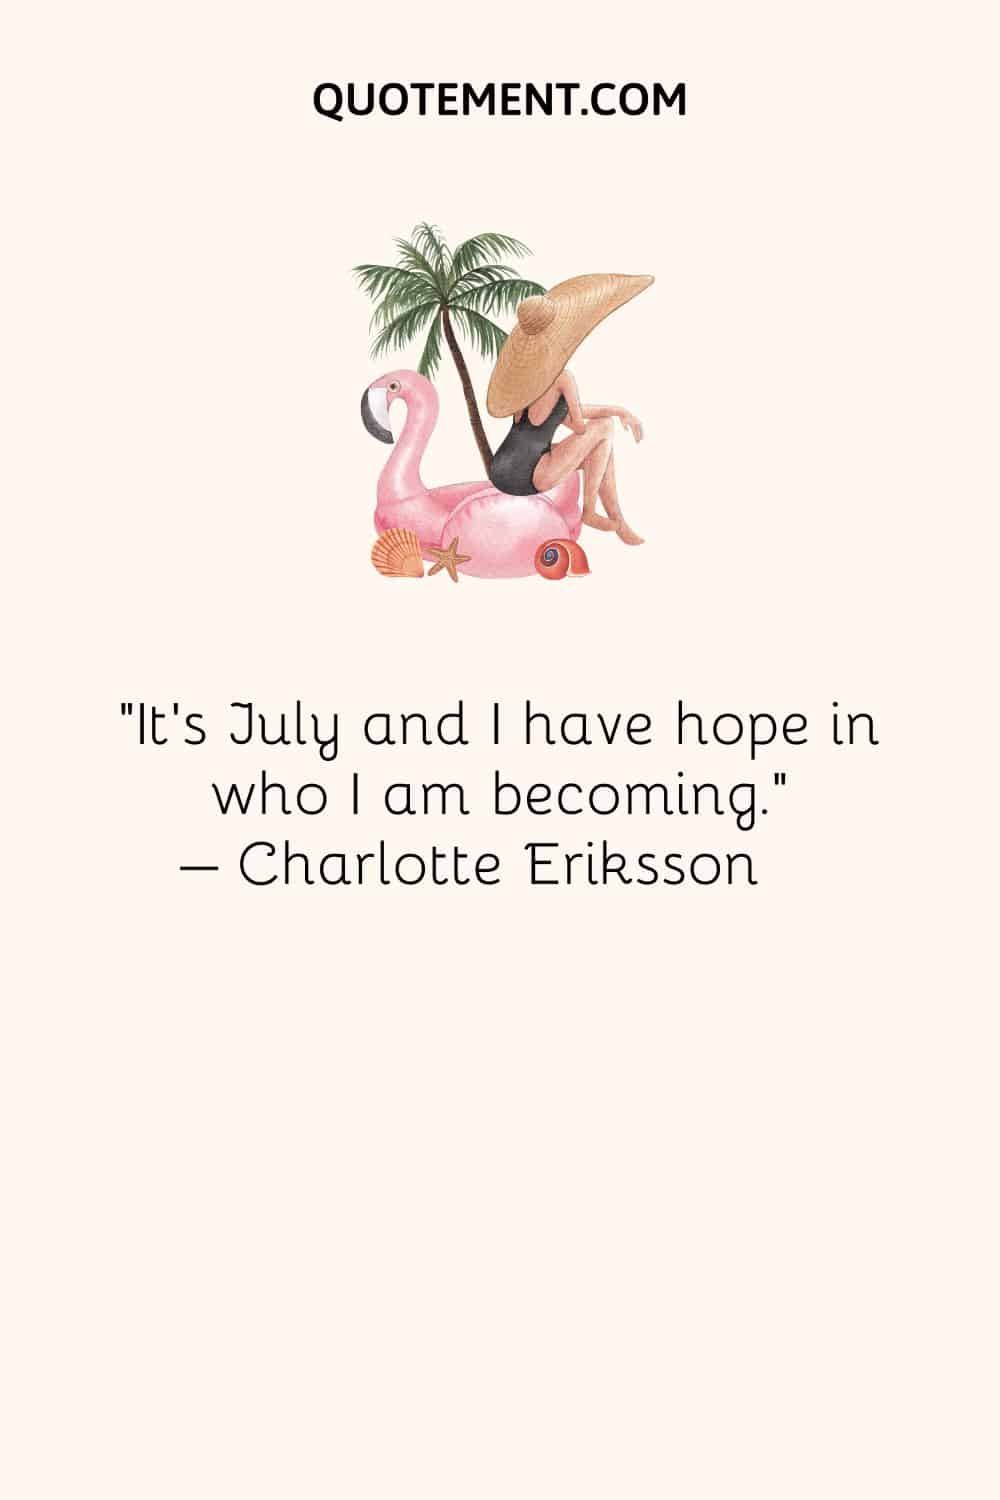 It’s July and I have hope in who I am becoming. – Charlotte Eriksson